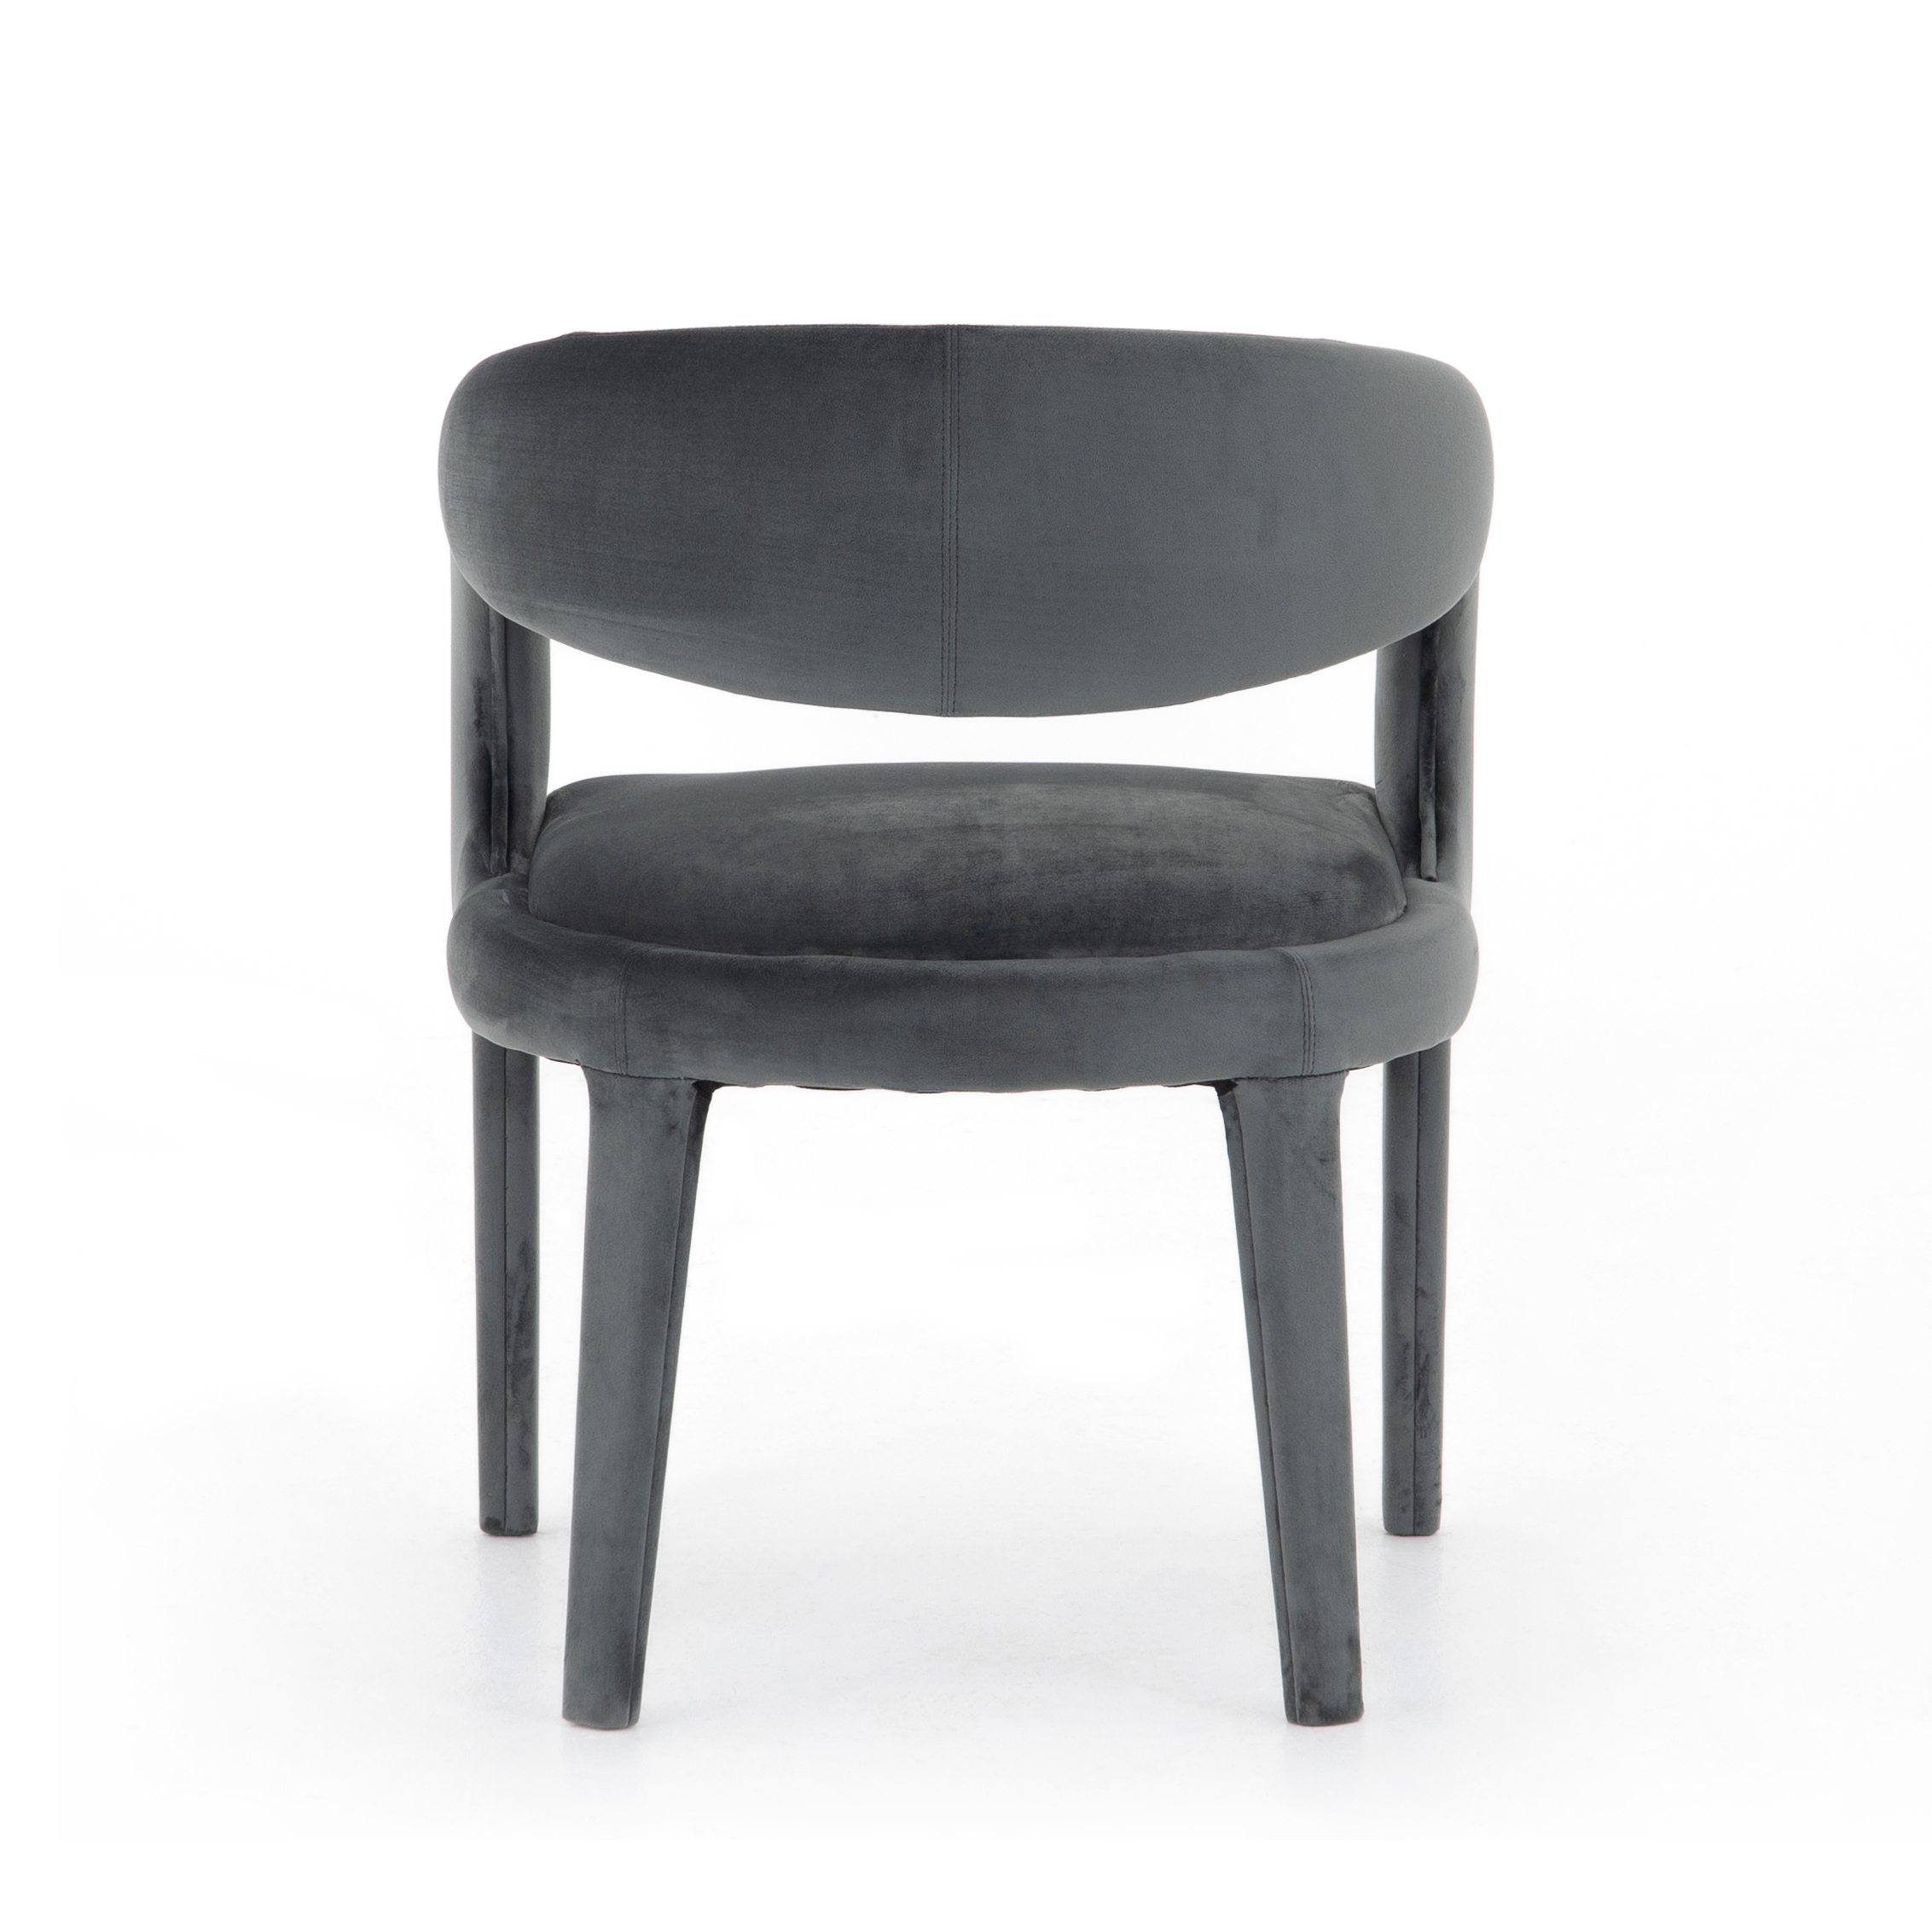 Hawkins Dining Chair-Charcoal Velvet - Image 5